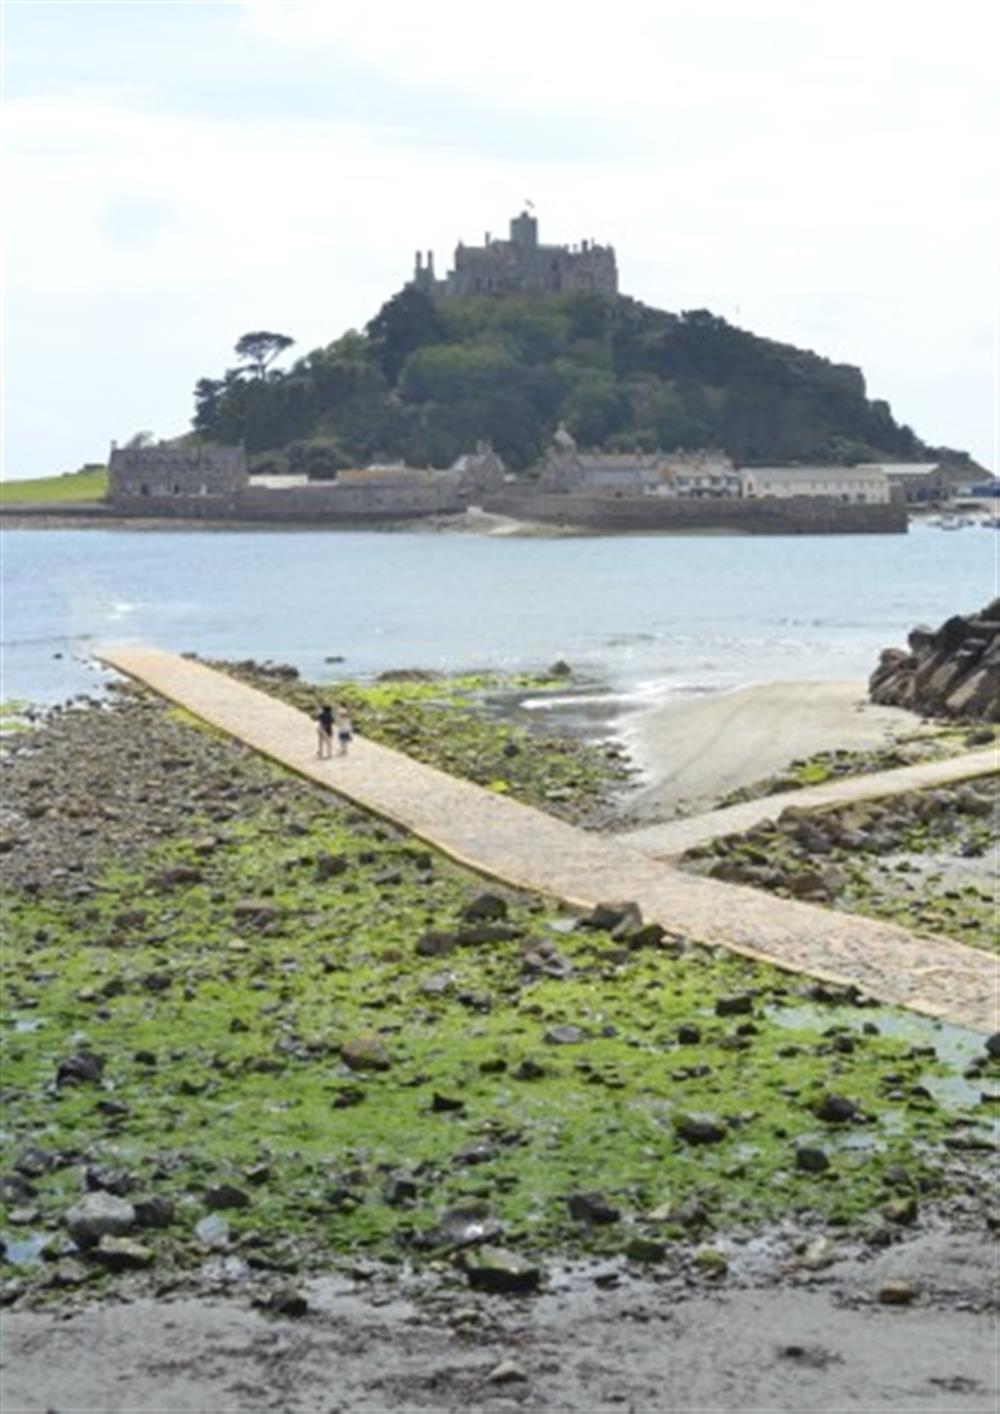 St Michael's Mount is a 45 minute drive. Walk across the causeway or catch the water-taxi to the island at 3C, The Old Sail Loft in Helford Passage